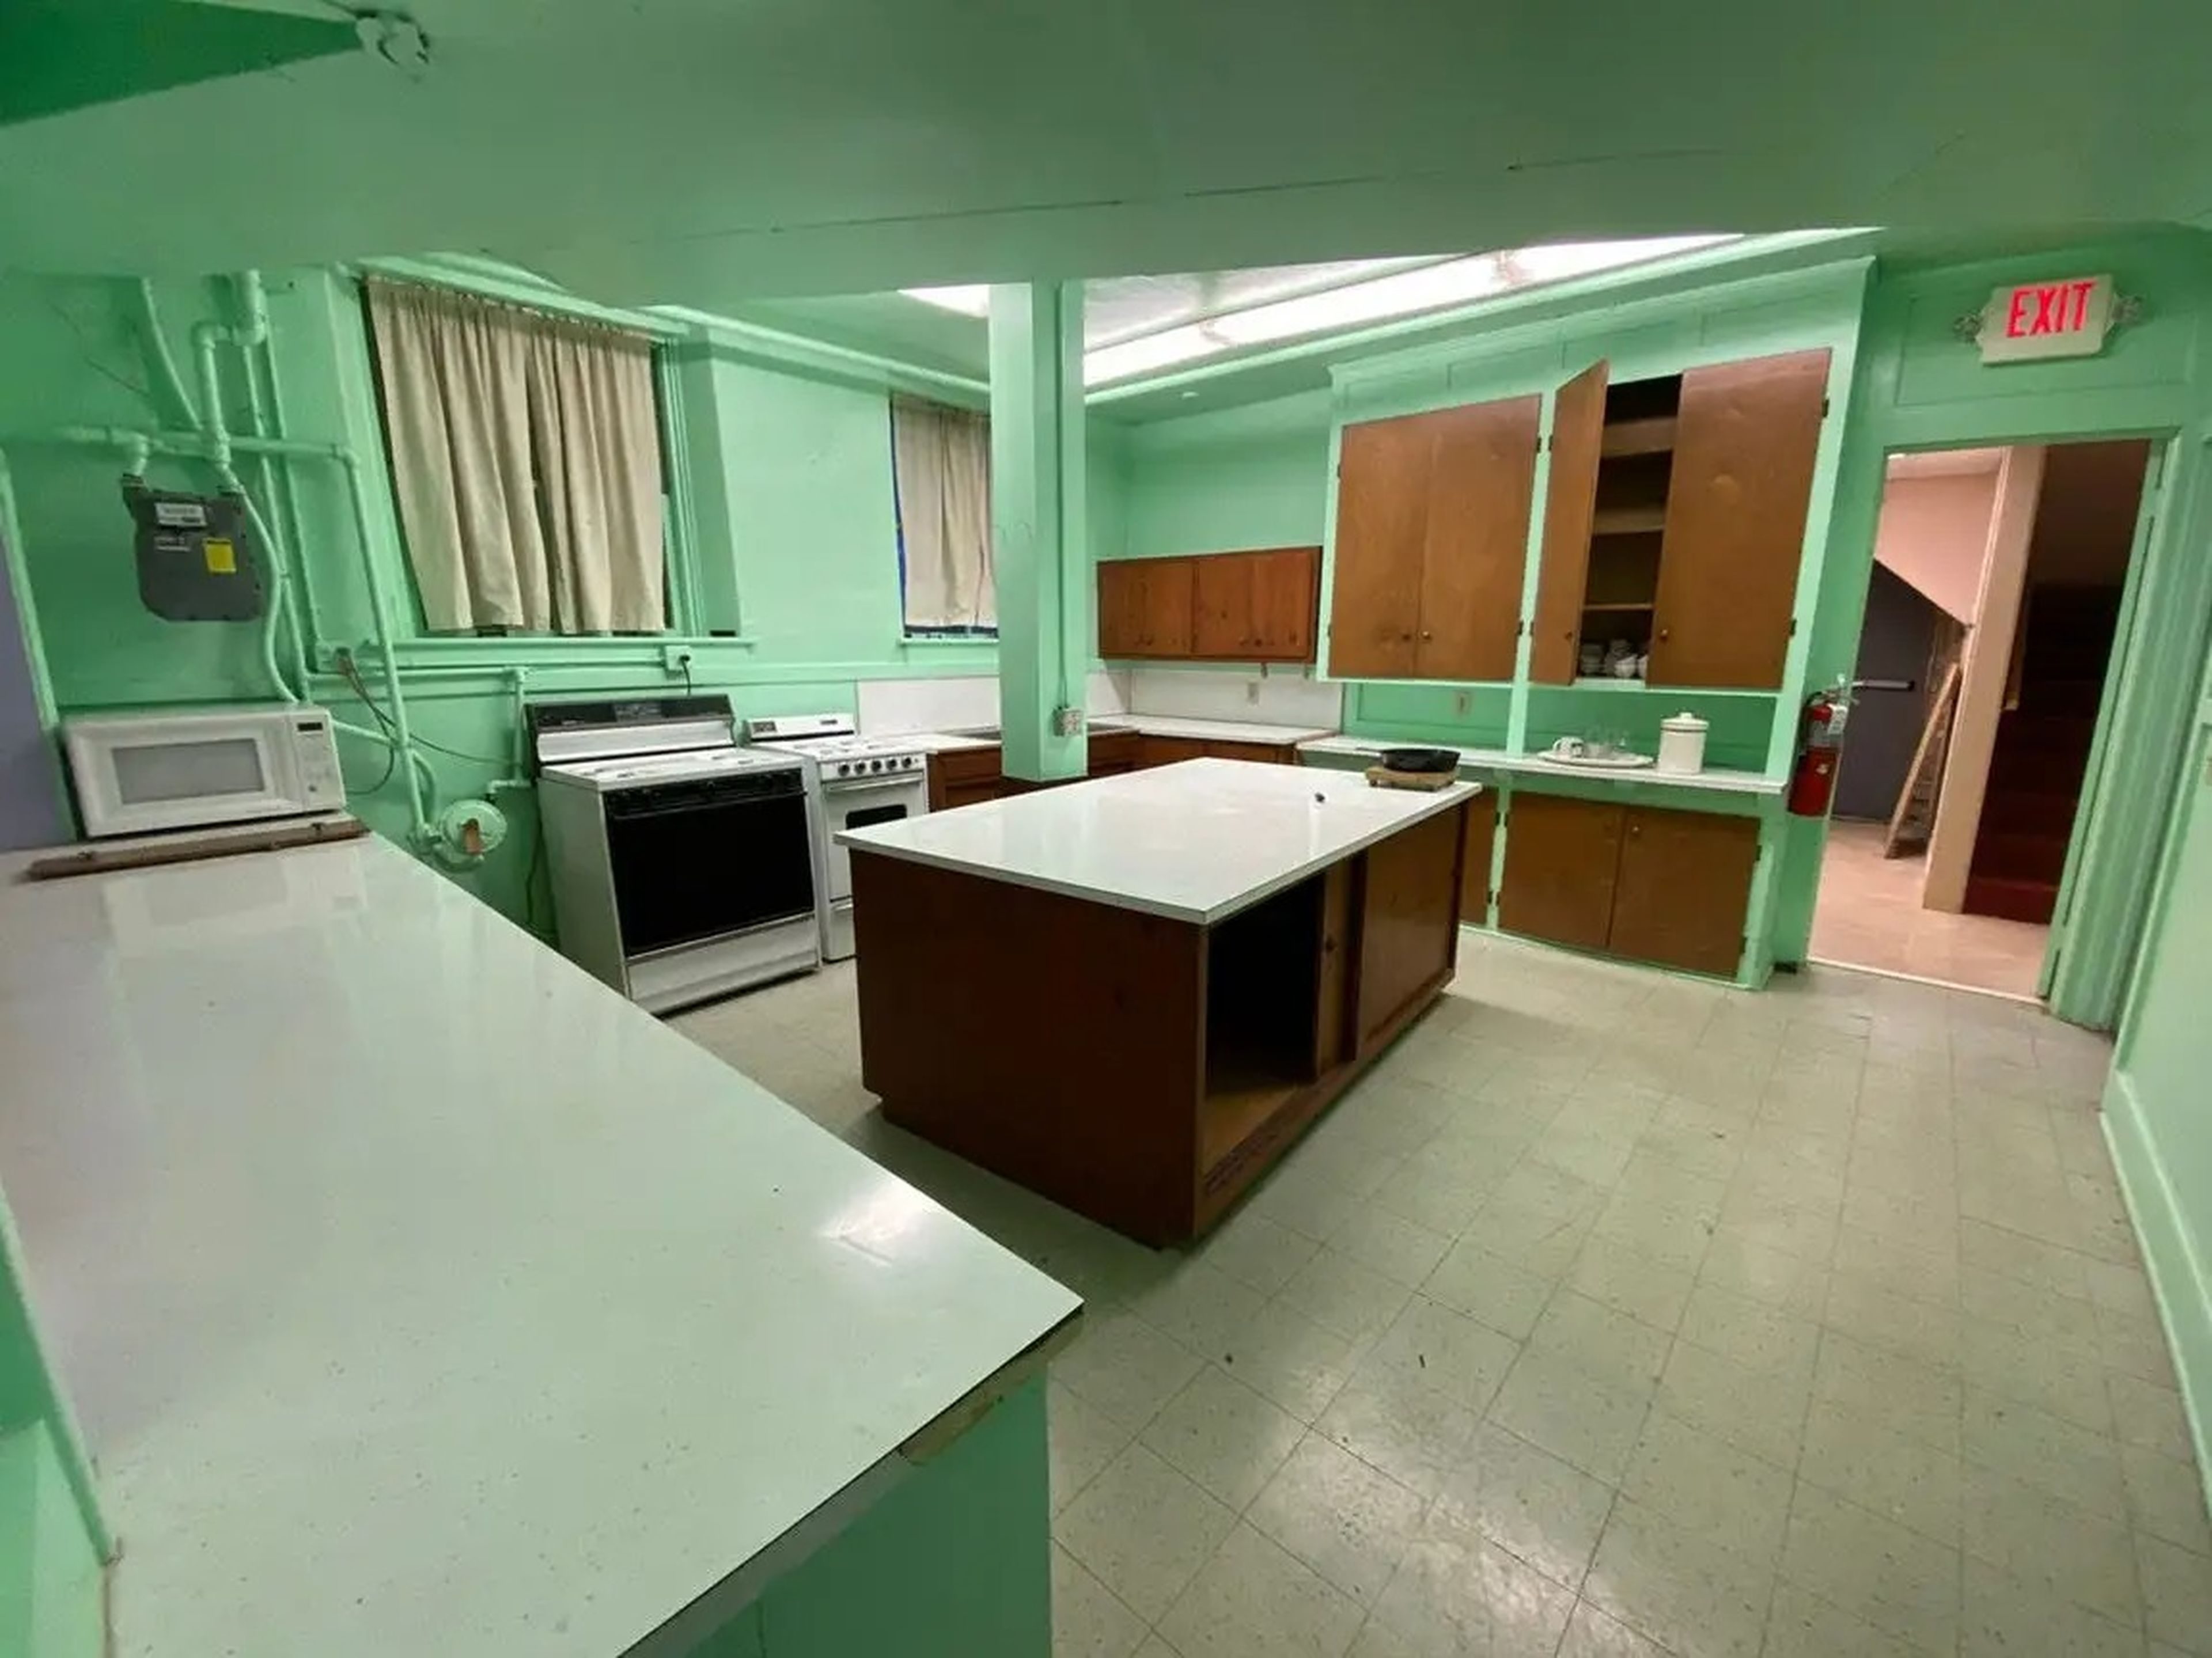 A kitchen with bright green walls, white floors, and fluorescent lighting.